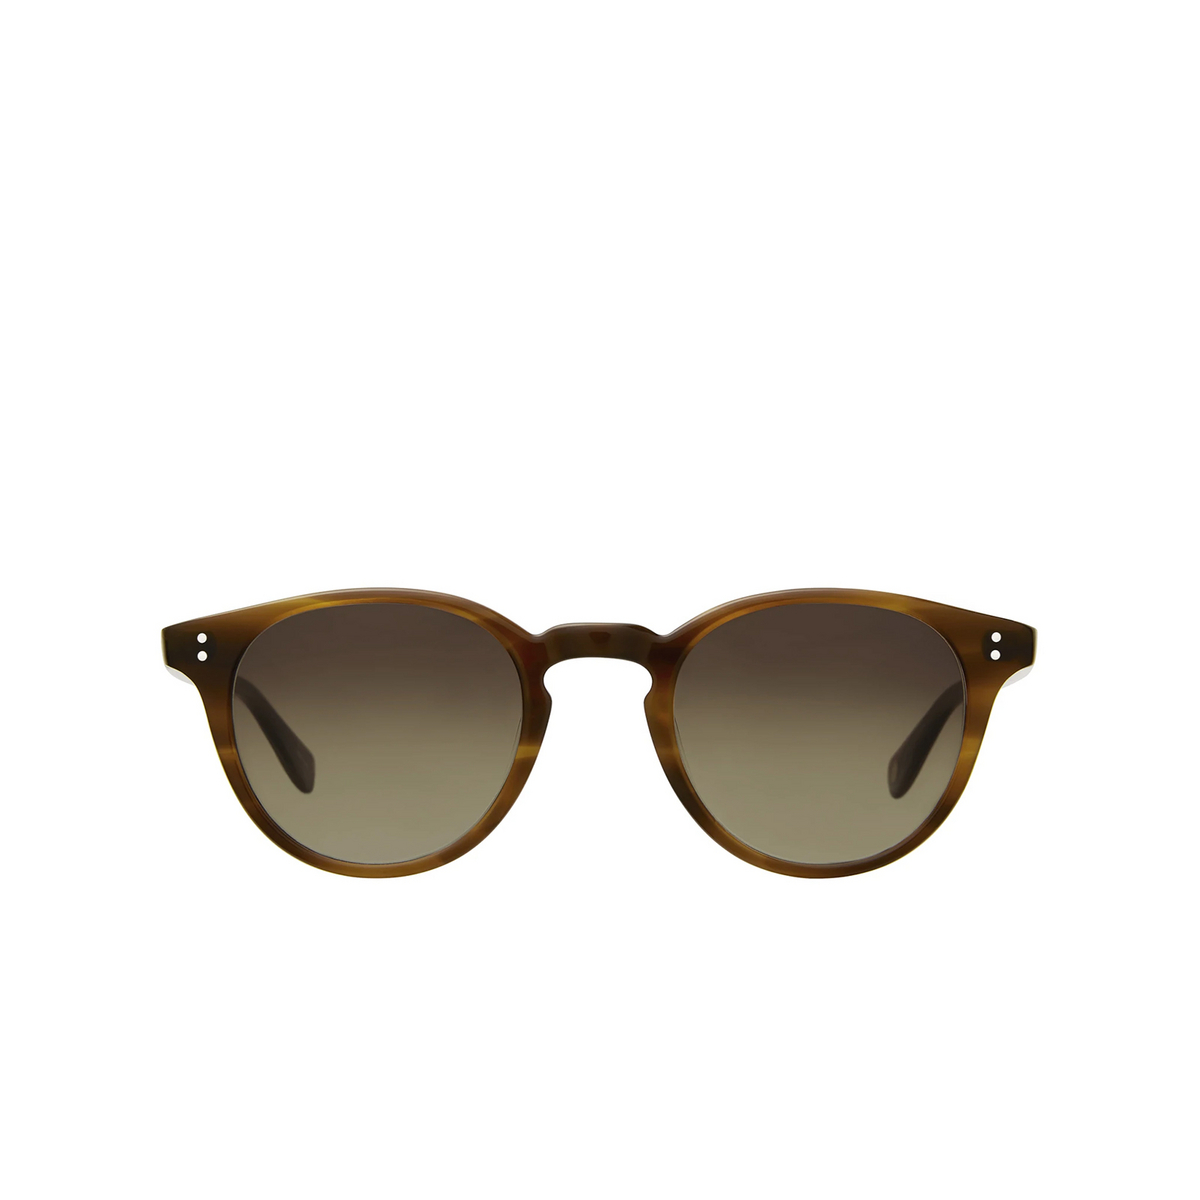 Garrett Leight® Round Sunglasses: Clement Sun color Saddle Tortoise/pure Brown Sdt/pbn - front view.